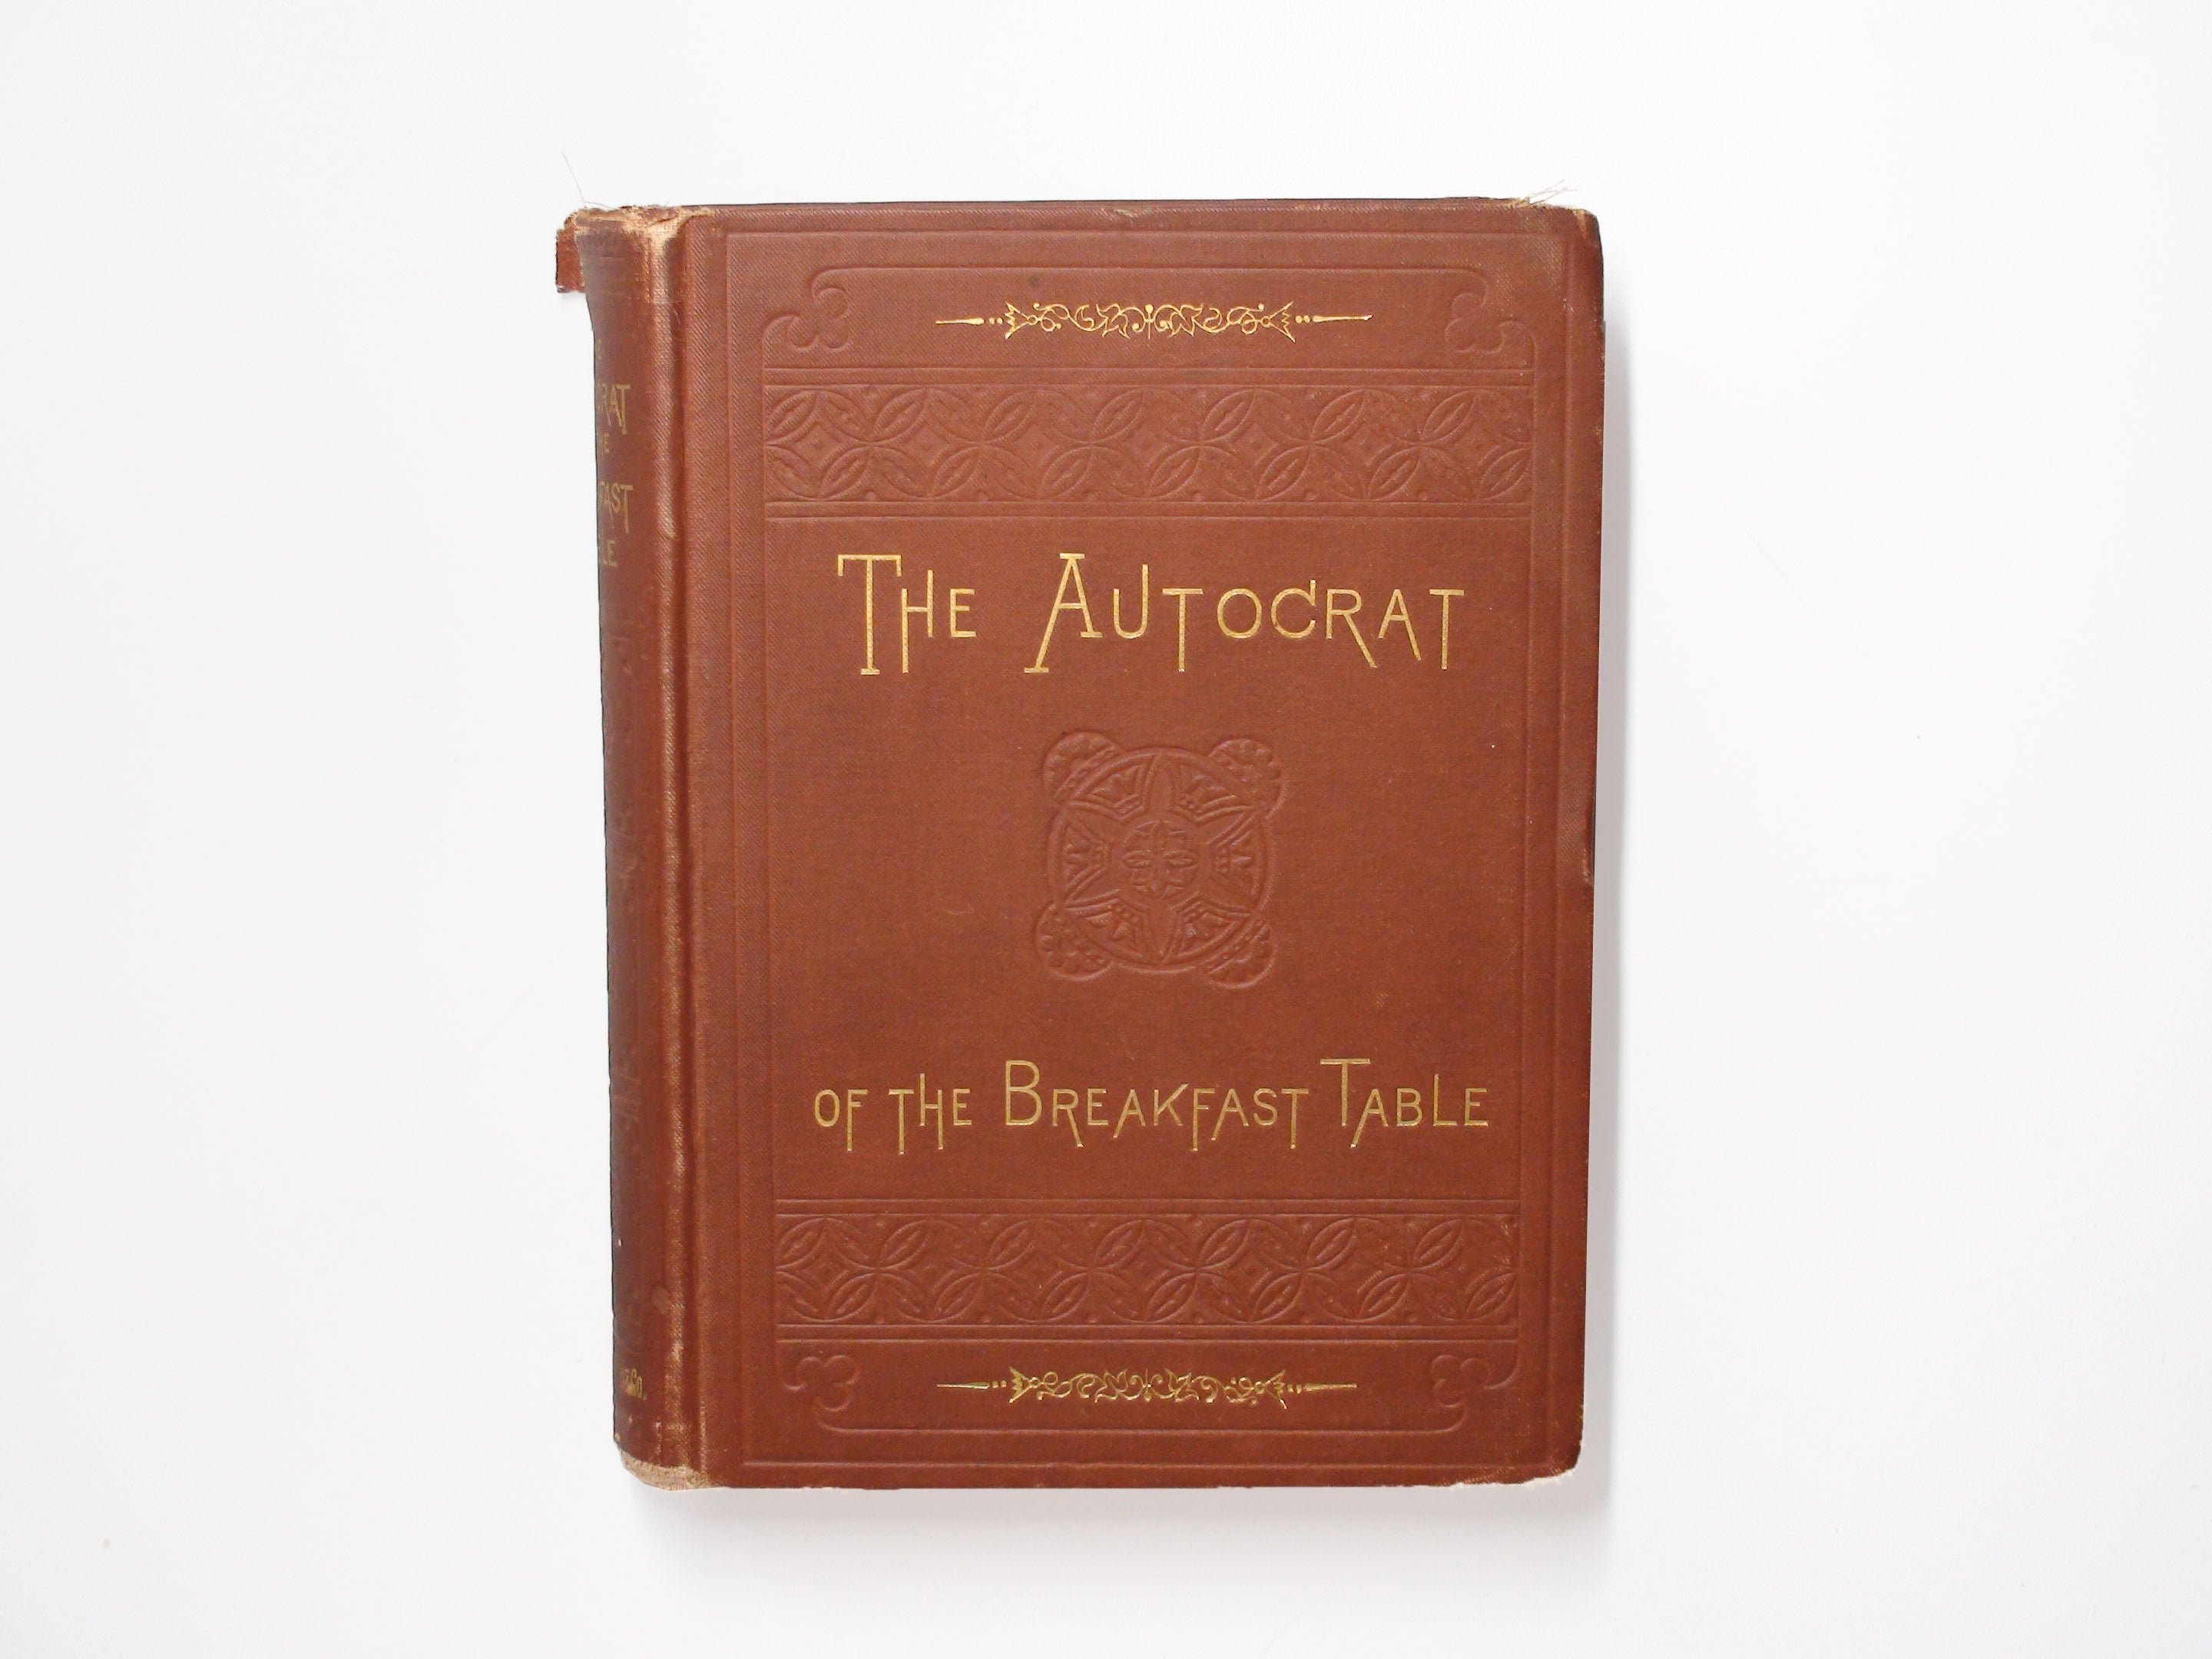 The Autocrat of the Breakfast Table, by Oliver Wendell Holmes Sr., 1880